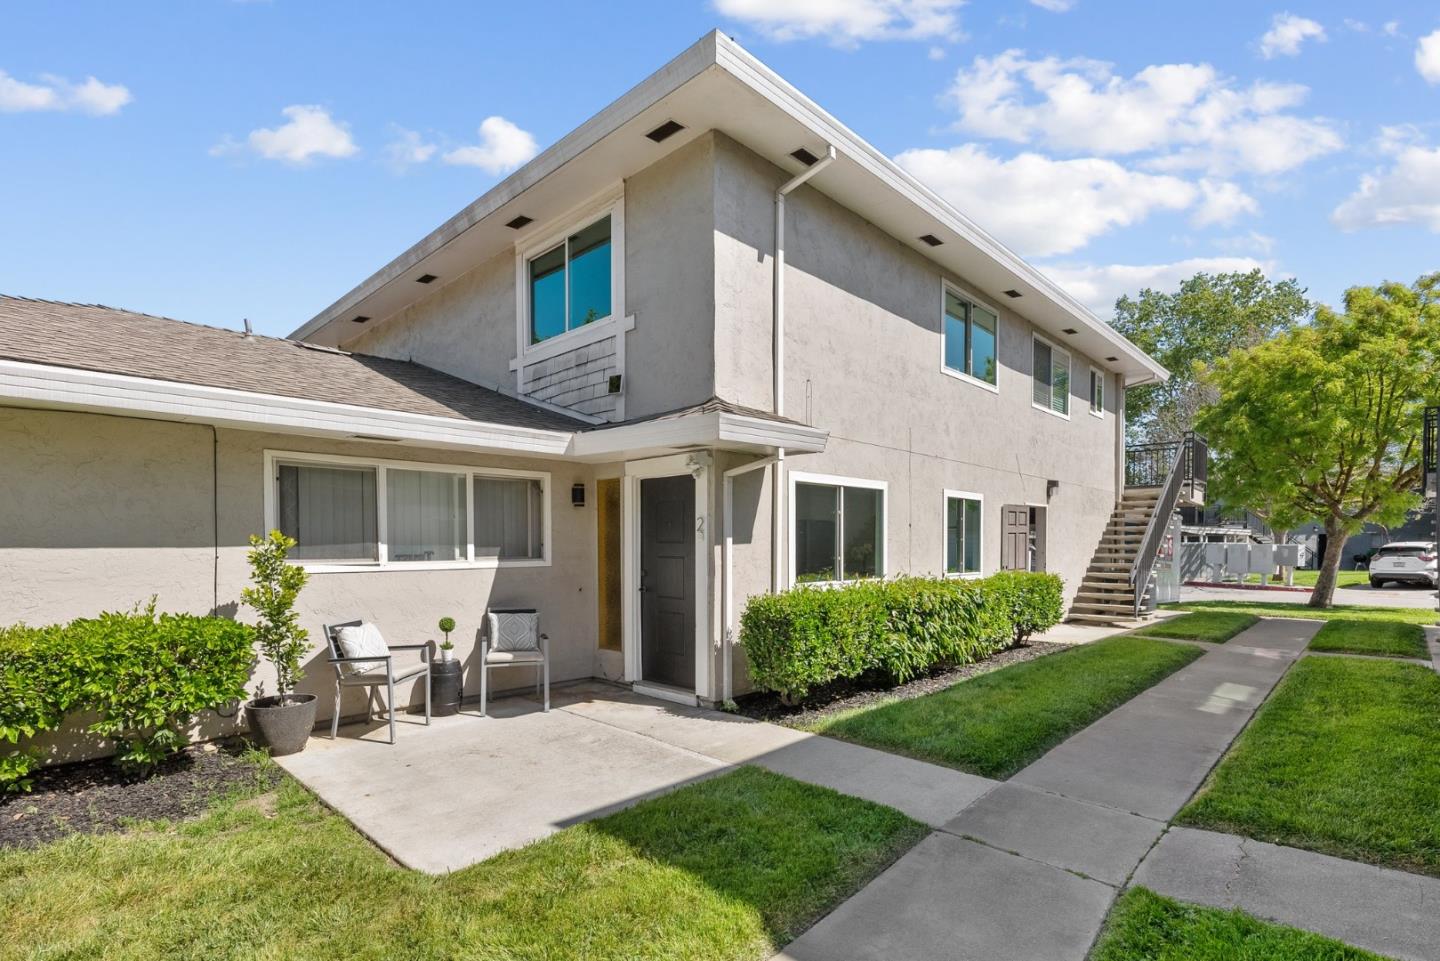 Photo of 198 Coy Dr #2 in San Jose, CA